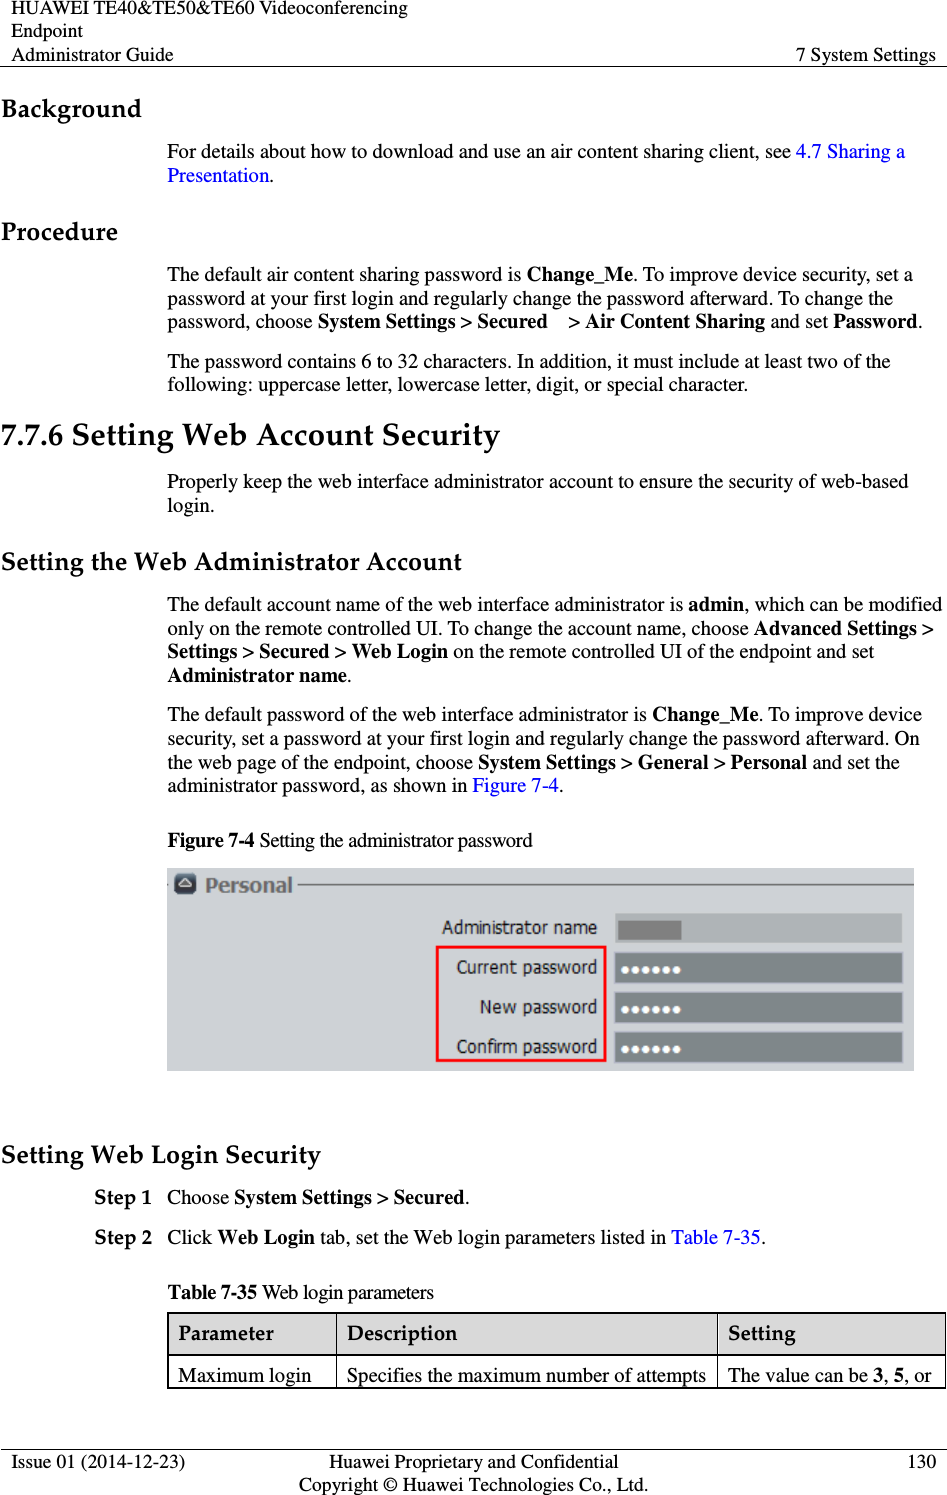 HUAWEI TE40&amp;TE50&amp;TE60 Videoconferencing Endpoint Administrator Guide  7 System Settings  Issue 01 (2014-12-23)  Huawei Proprietary and Confidential                                     Copyright © Huawei Technologies Co., Ltd. 130  Background For details about how to download and use an air content sharing client, see 4.7 Sharing a Presentation. Procedure The default air content sharing password is Change_Me. To improve device security, set a password at your first login and regularly change the password afterward. To change the password, choose System Settings &gt; Secured    &gt; Air Content Sharing and set Password. The password contains 6 to 32 characters. In addition, it must include at least two of the following: uppercase letter, lowercase letter, digit, or special character. 7.7.6 Setting Web Account Security Properly keep the web interface administrator account to ensure the security of web-based login. Setting the Web Administrator Account The default account name of the web interface administrator is admin, which can be modified only on the remote controlled UI. To change the account name, choose Advanced Settings &gt; Settings &gt; Secured &gt; Web Login on the remote controlled UI of the endpoint and set Administrator name. The default password of the web interface administrator is Change_Me. To improve device security, set a password at your first login and regularly change the password afterward. On the web page of the endpoint, choose System Settings &gt; General &gt; Personal and set the administrator password, as shown in Figure 7-4. Figure 7-4 Setting the administrator password   Setting Web Login Security Step 1 Choose System Settings &gt; Secured. Step 2 Click Web Login tab, set the Web login parameters listed in Table 7-35. Table 7-35 Web login parameters Parameter  Description  Setting Maximum login  Specifies the maximum number of attempts  The value can be 3, 5, or 